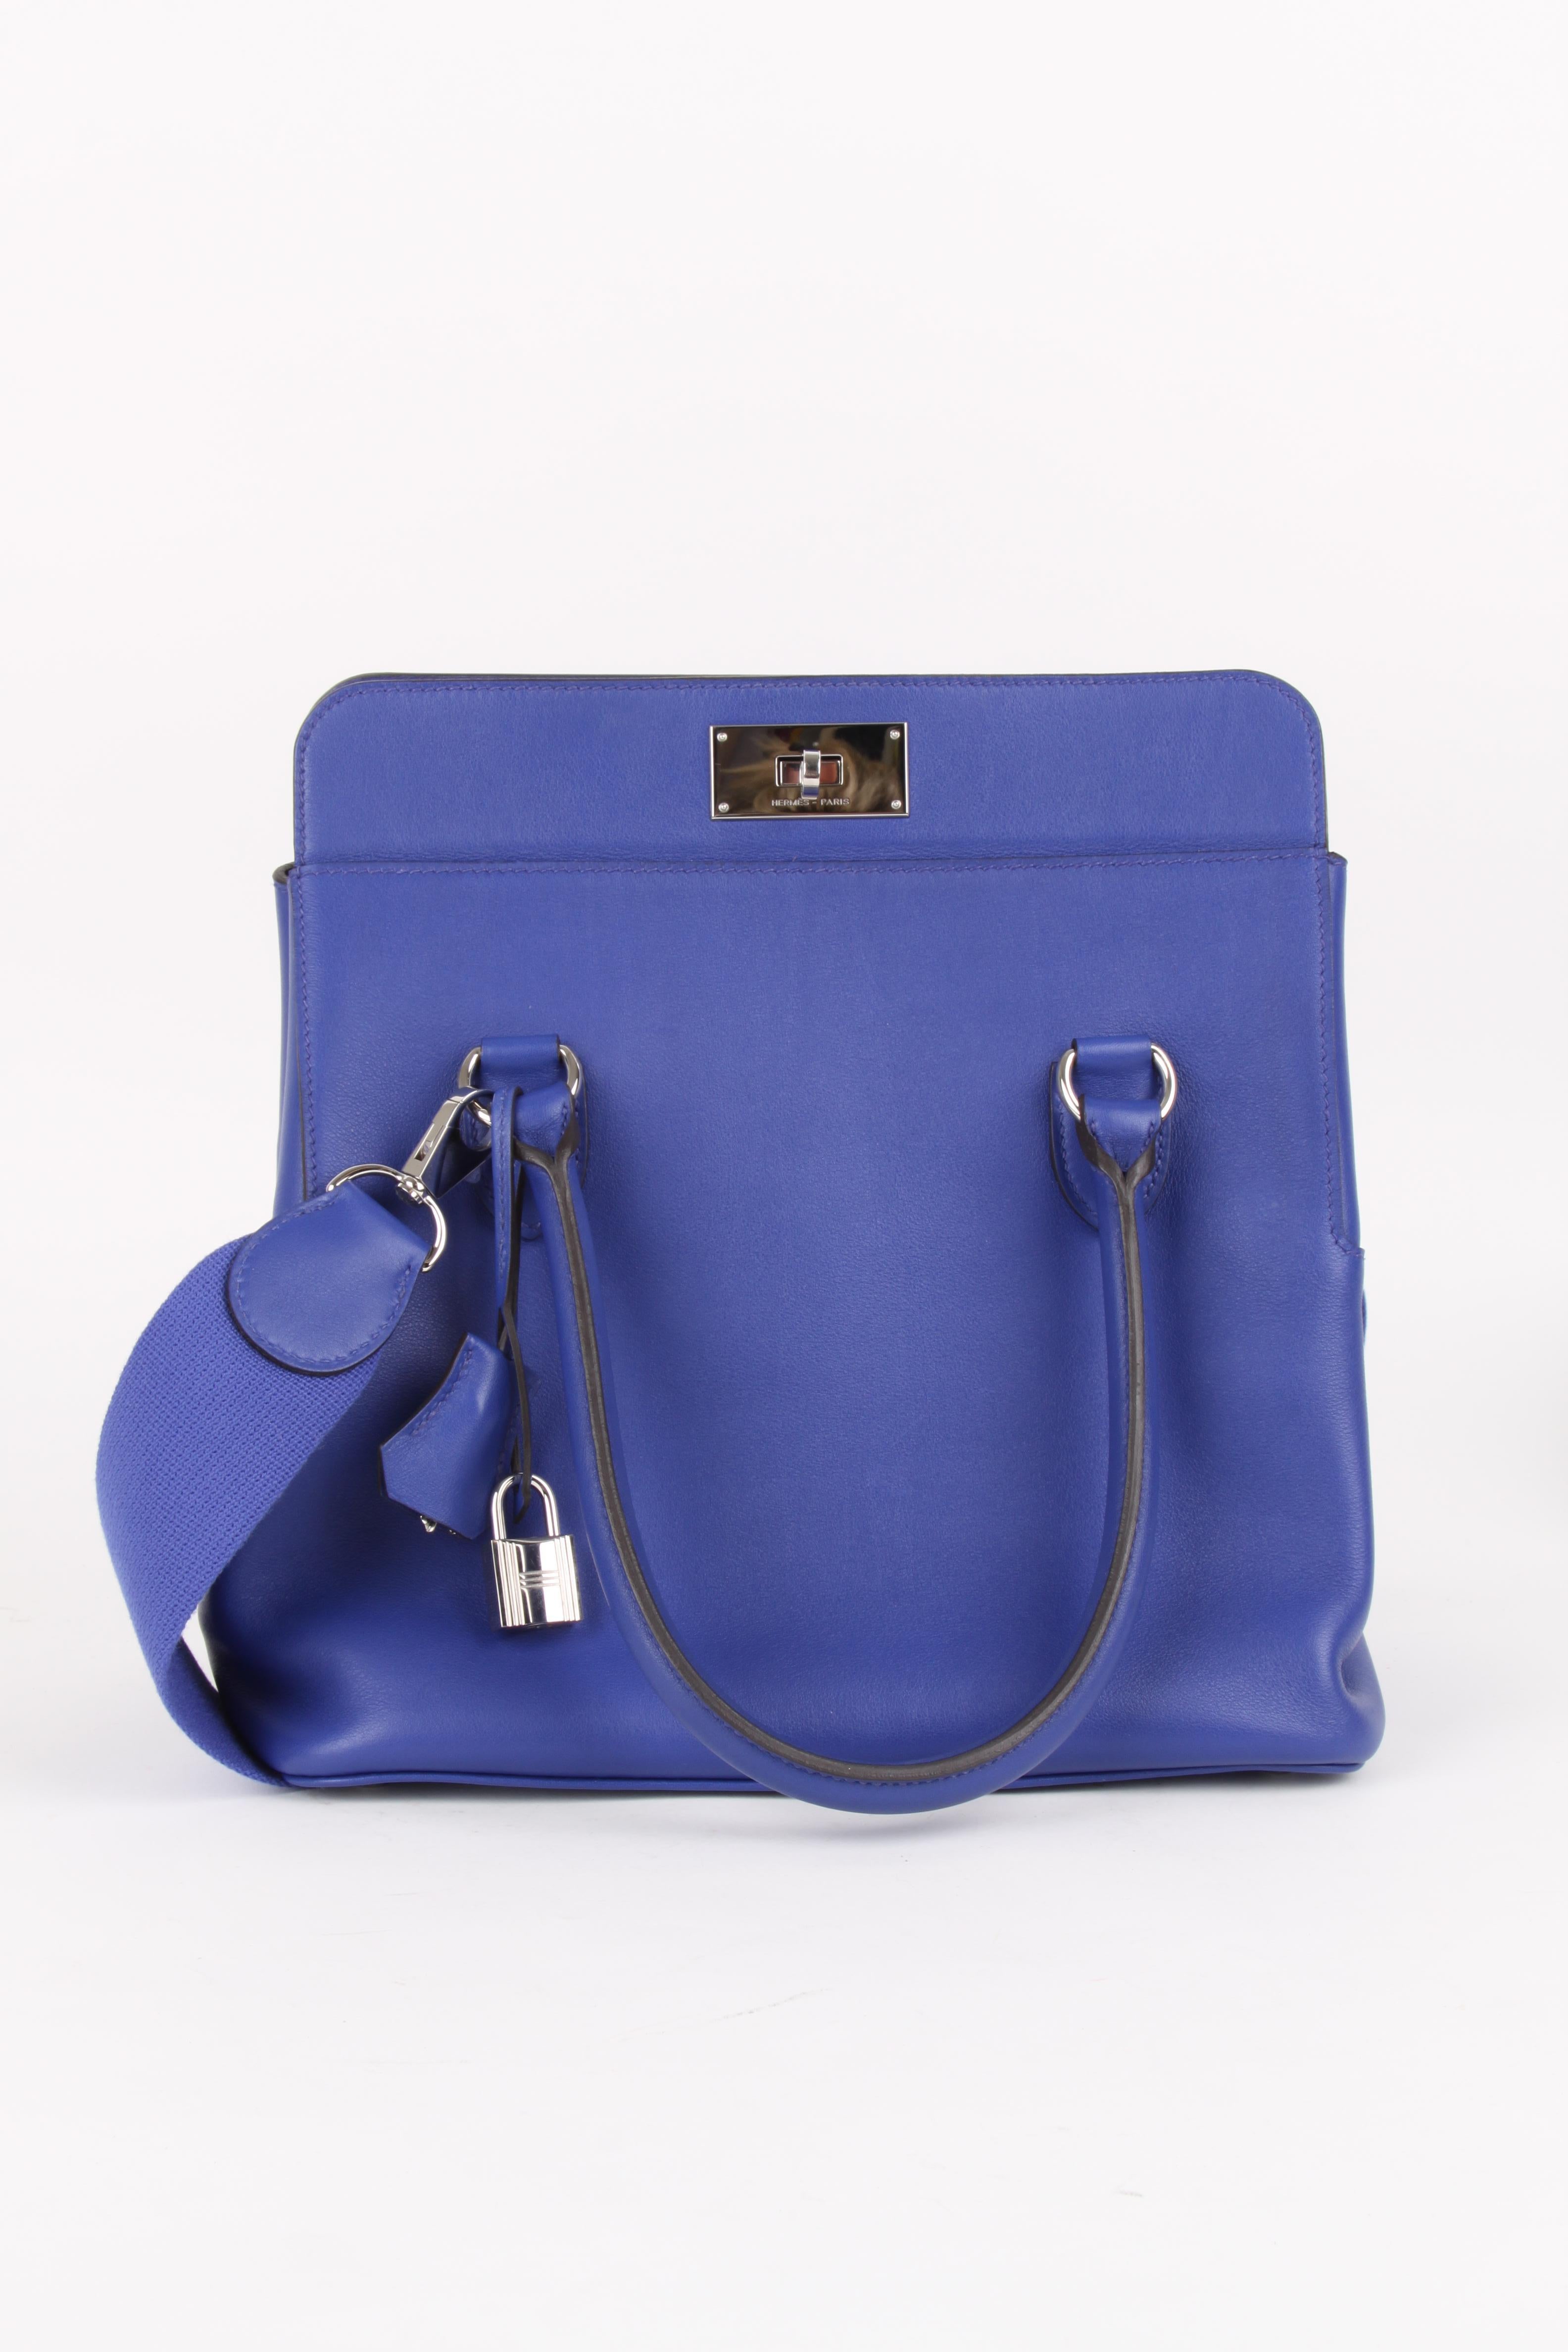 COLOR: Electric Blue 

MATERIAL: Swift Leather

HARDWARE: Palladium plated hardware 

COMES WITH: Raincoat, box, and dust cover, adjustable shoulder strap

ORGIN: France 

CONDITION: 9/10

MEASURES: 26 x 25 x 18 cm Handle: 42 cm Strap: 80 cm